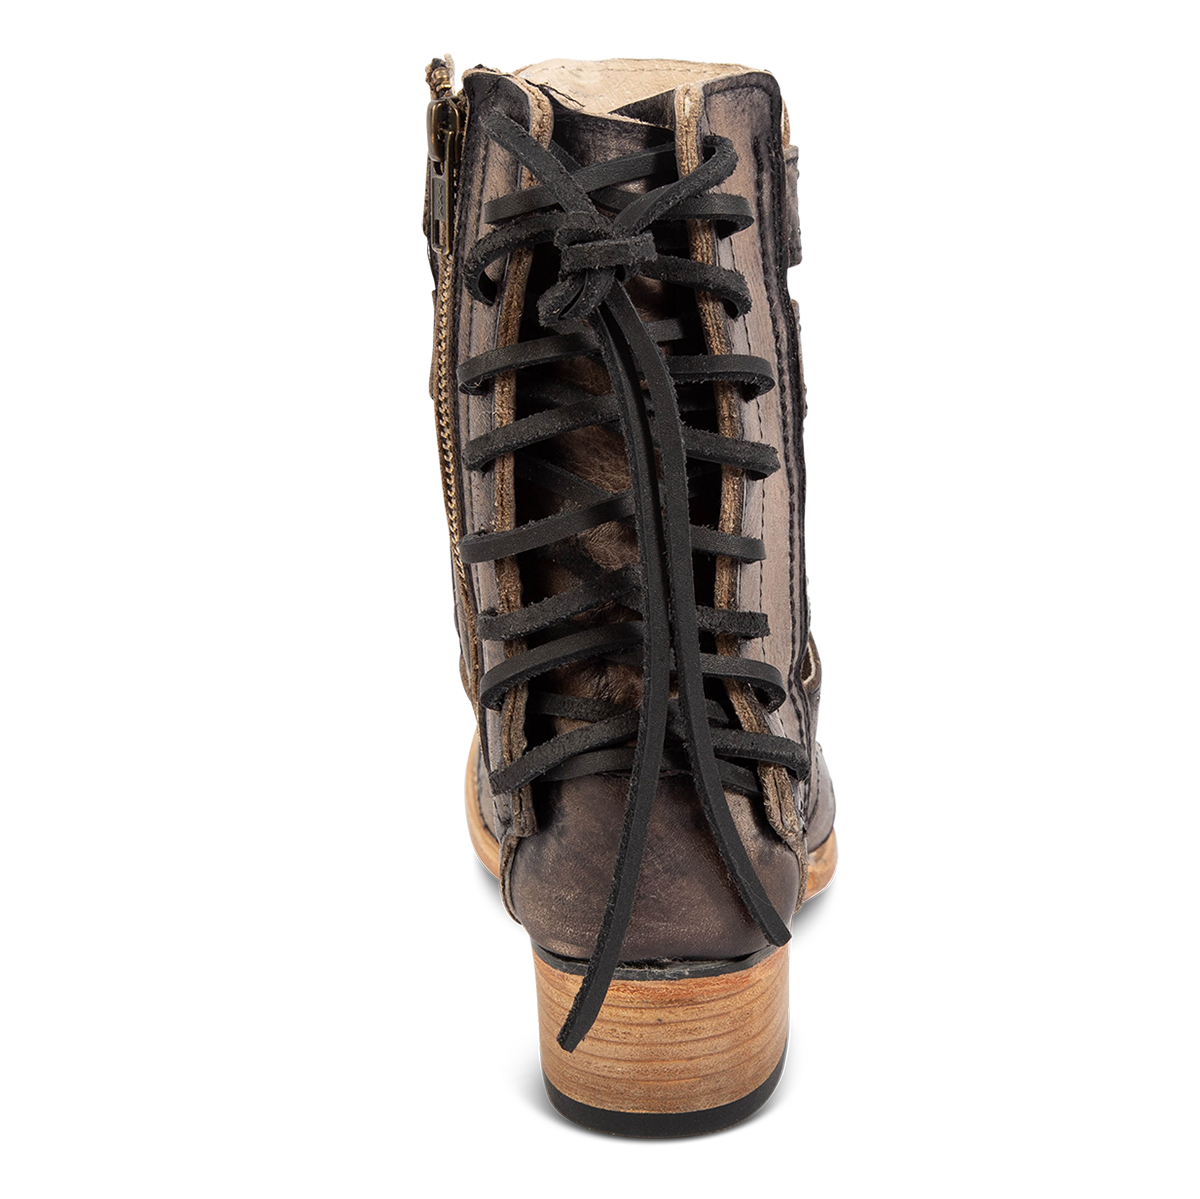 Back view showing back panel lacing and a low block heel on FREEBIRD women's ghost black distressed leather sandal 